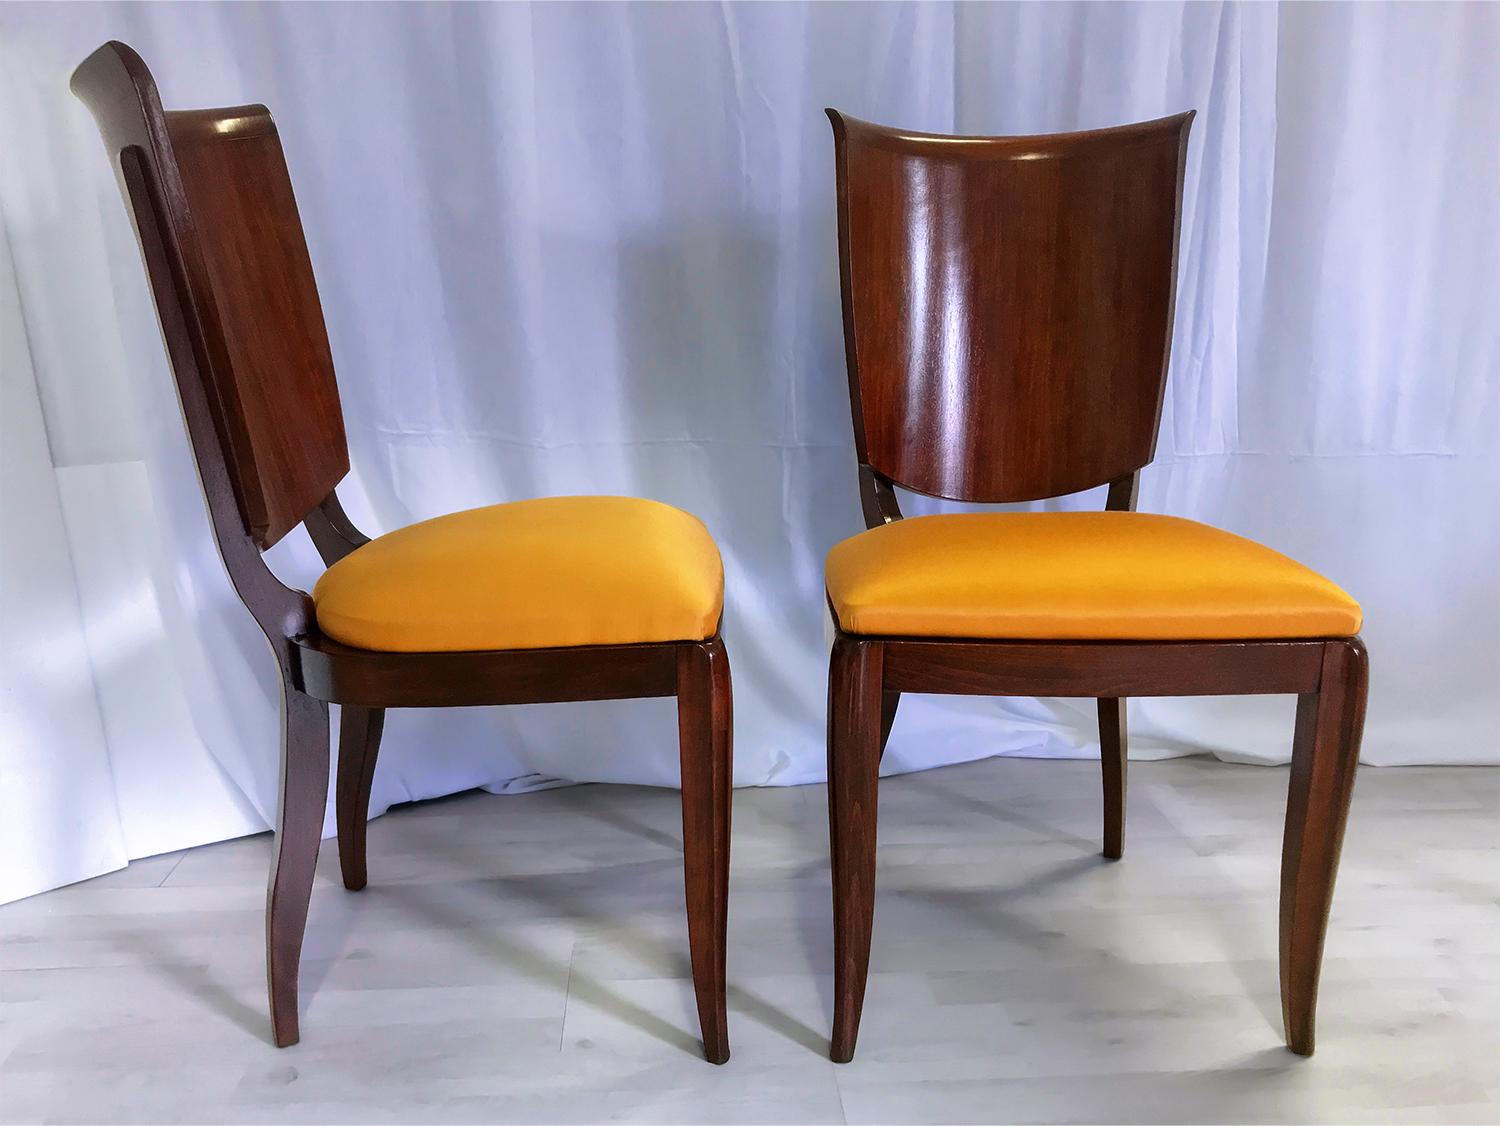 Italian Mid-Century Yellow Dining Chairs by Vittorio Dassi, Set of Six, 1950s For Sale 6